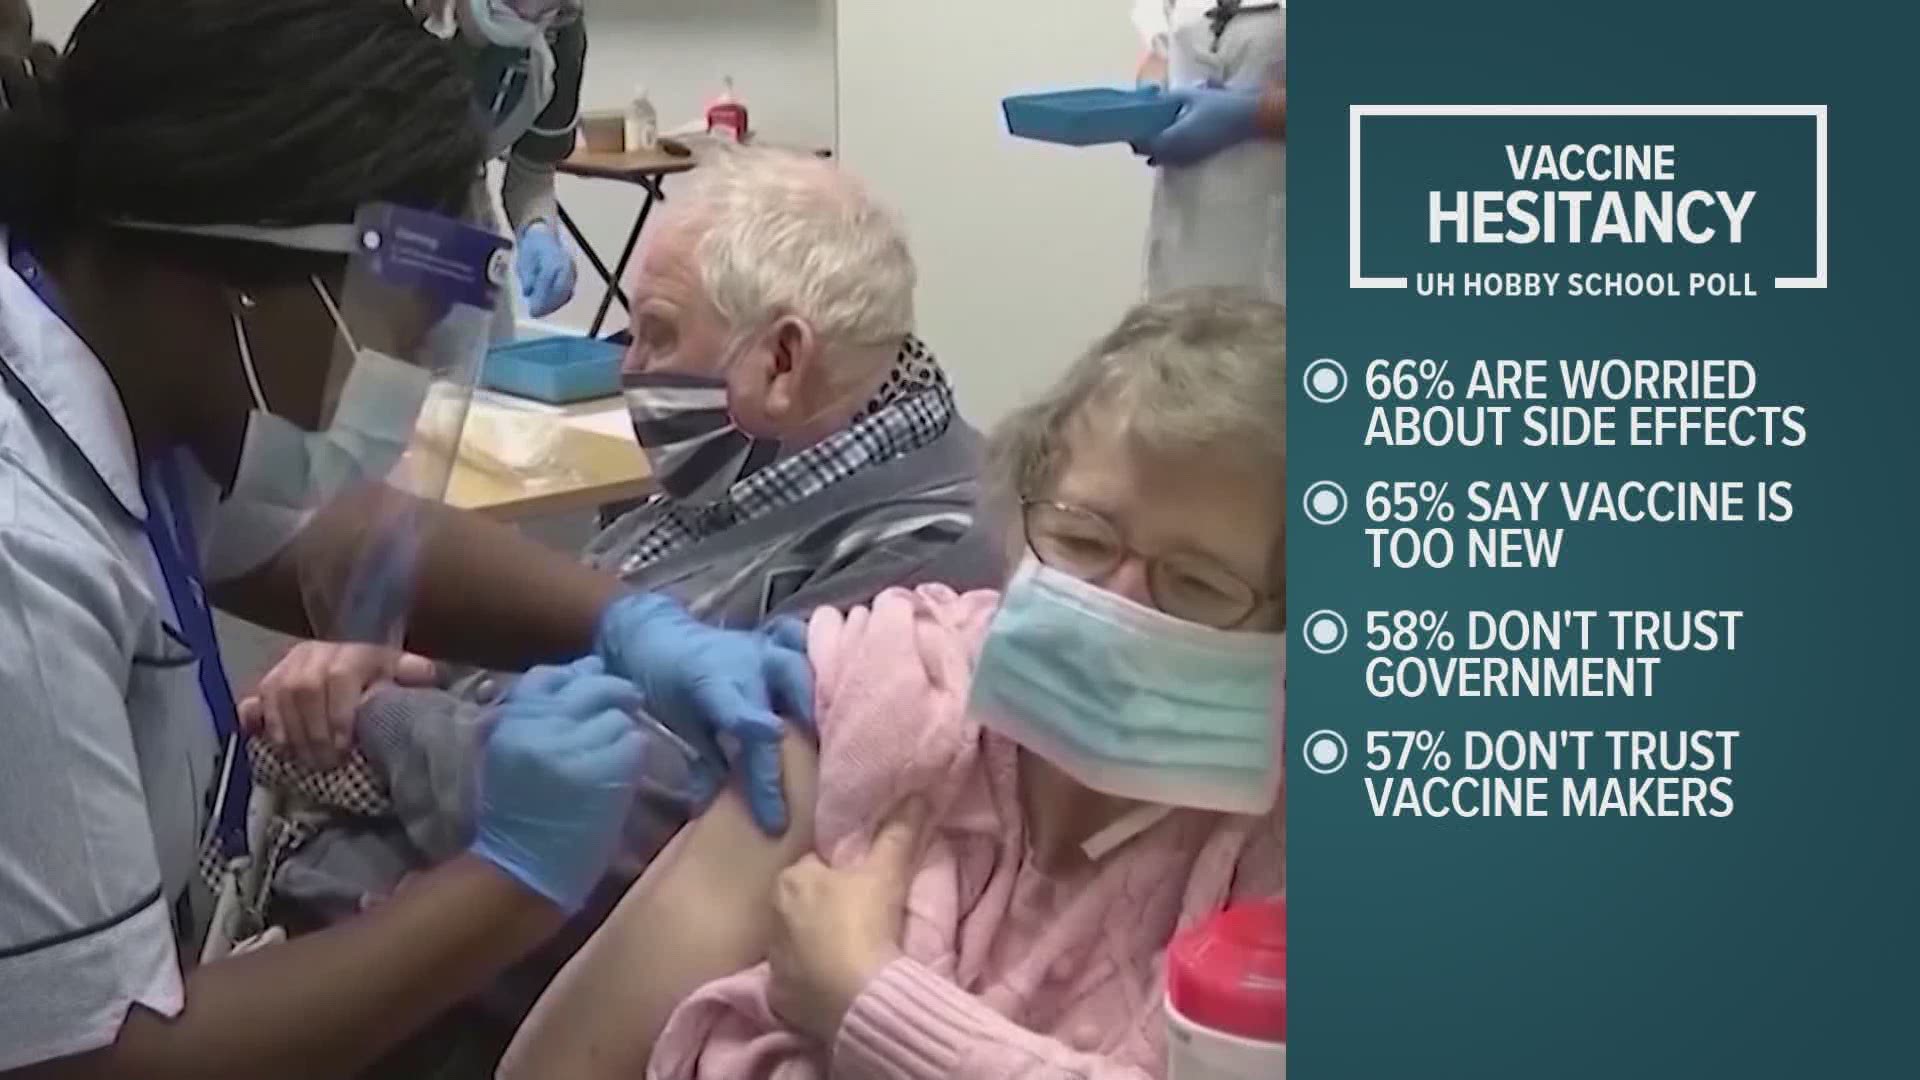 Of those least likely to get the COVID-19 vaccine, a common concern was possible side effects, distrust of the government or feelings the virus was overhyped.